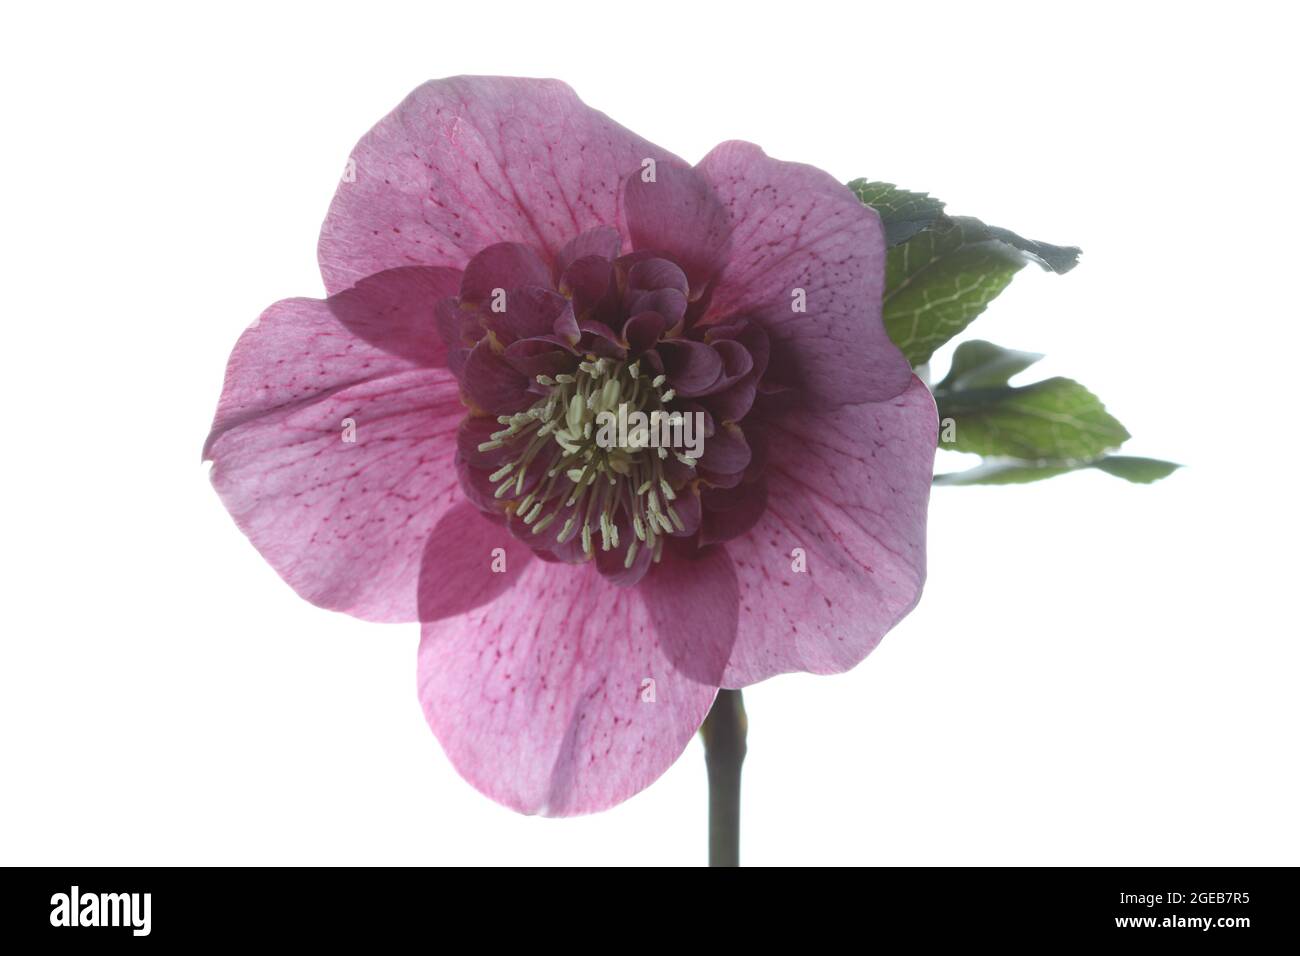 Open flower of a hellebore plant on a stem photographjed on a white backgopund Stock Photo